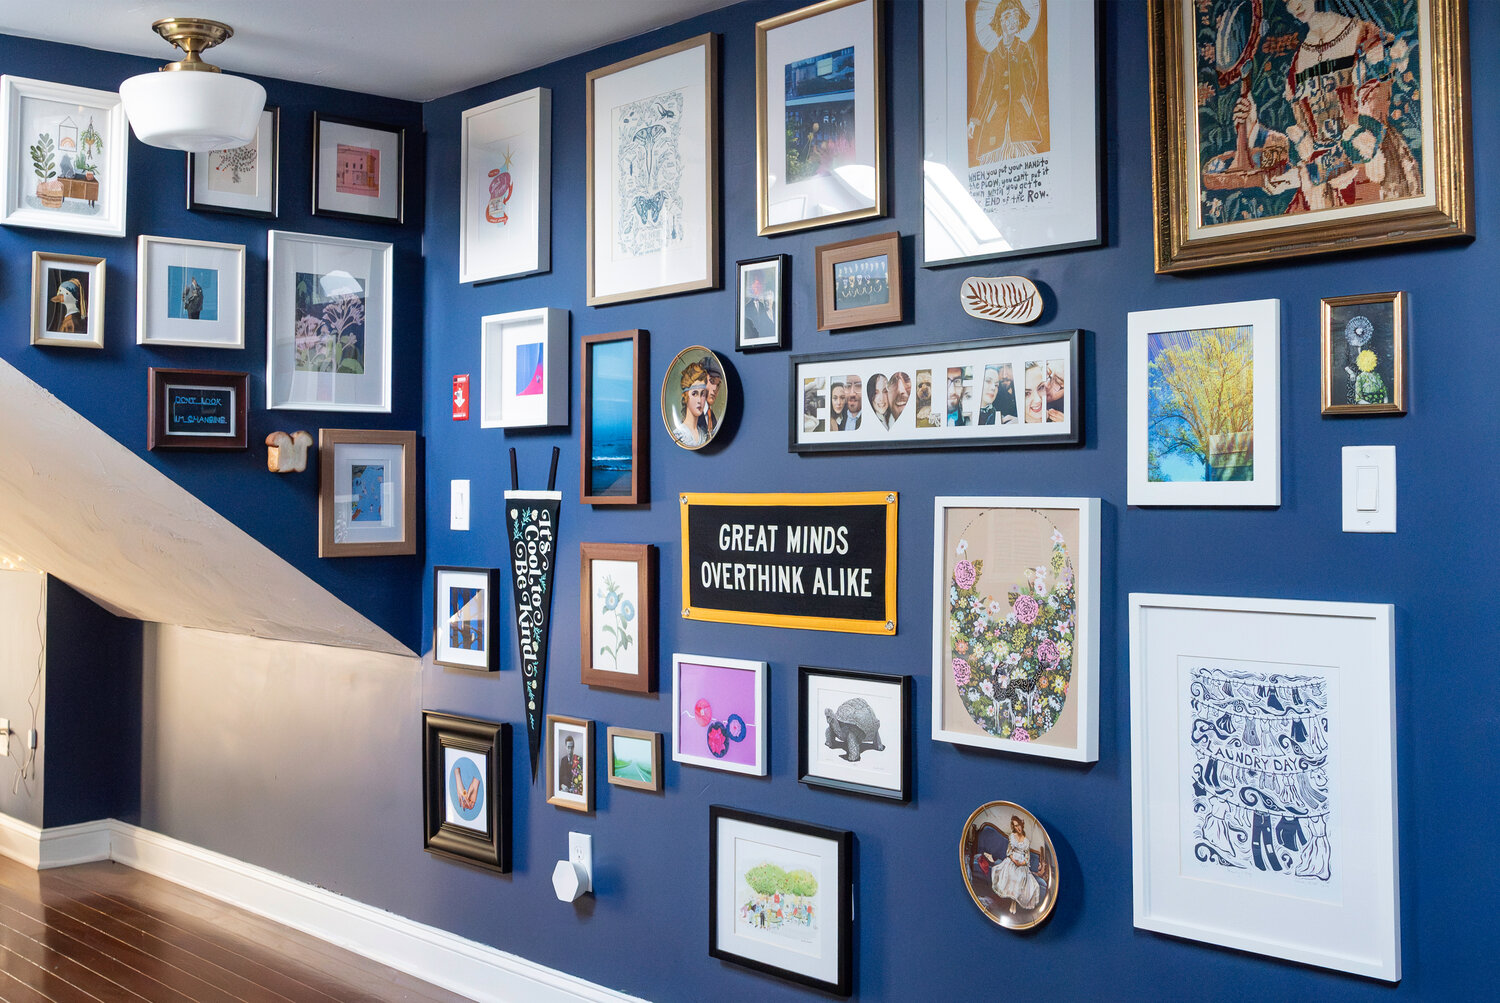 “The gallery walls are living wallpaper; I’m able to update and rearrange it as I want, each piece tied to a memory of a place, person, or event. I keep a pile of frames in my closet as I continue to find pieces or print my own work,” says Pisari.